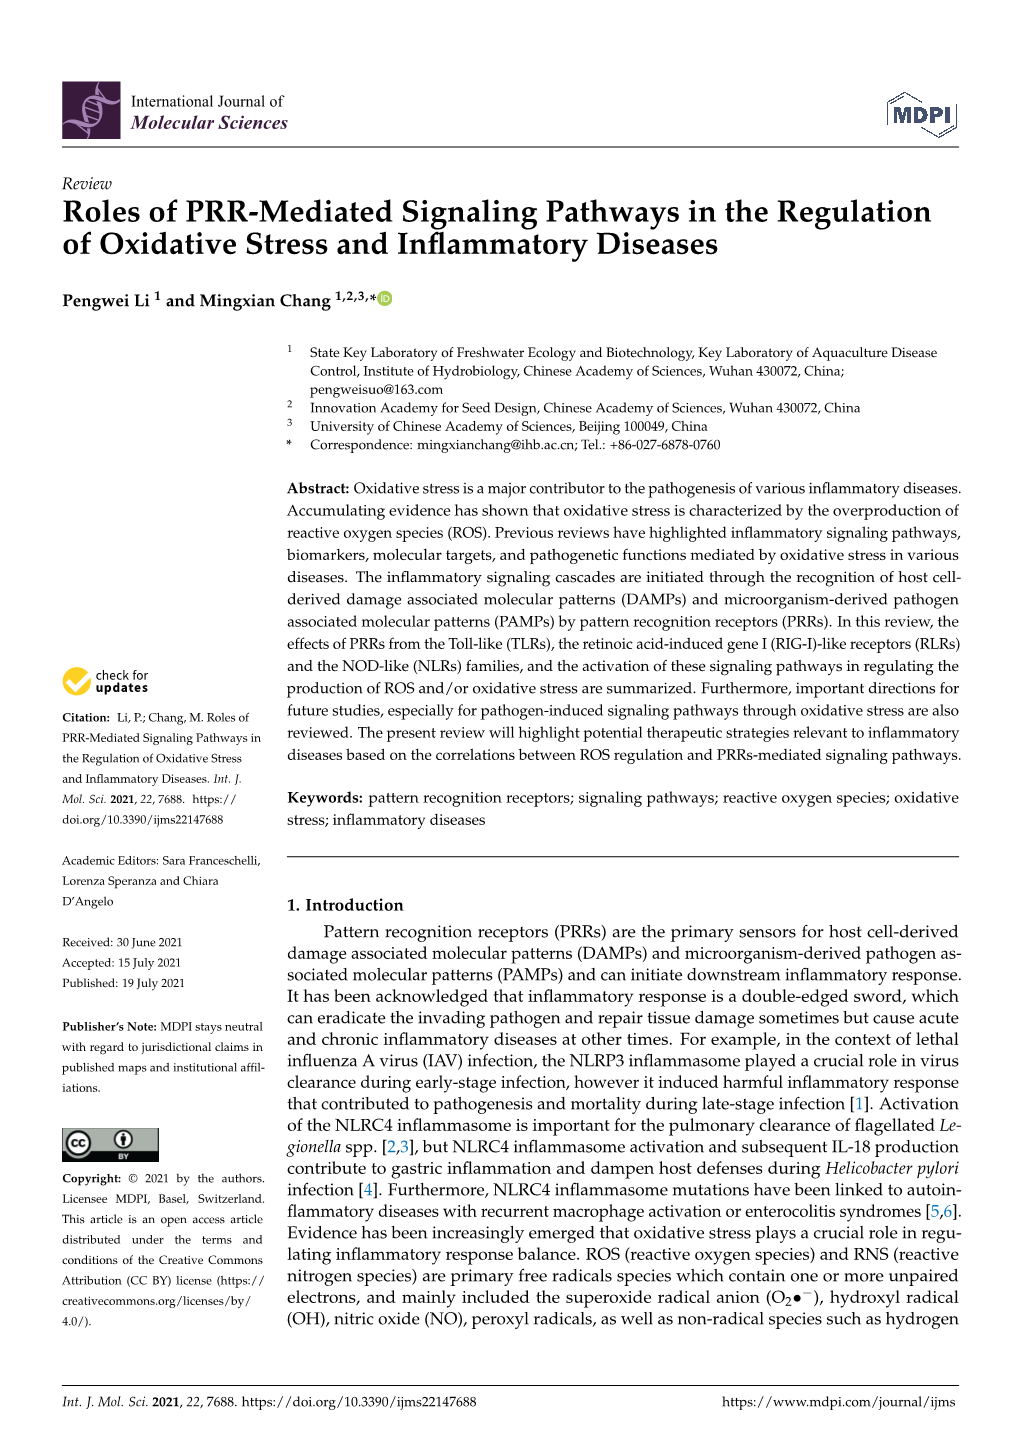 Roles of PRR-Mediated Signaling Pathways in the Regulation of Oxidative Stress and Inﬂammatory Diseases